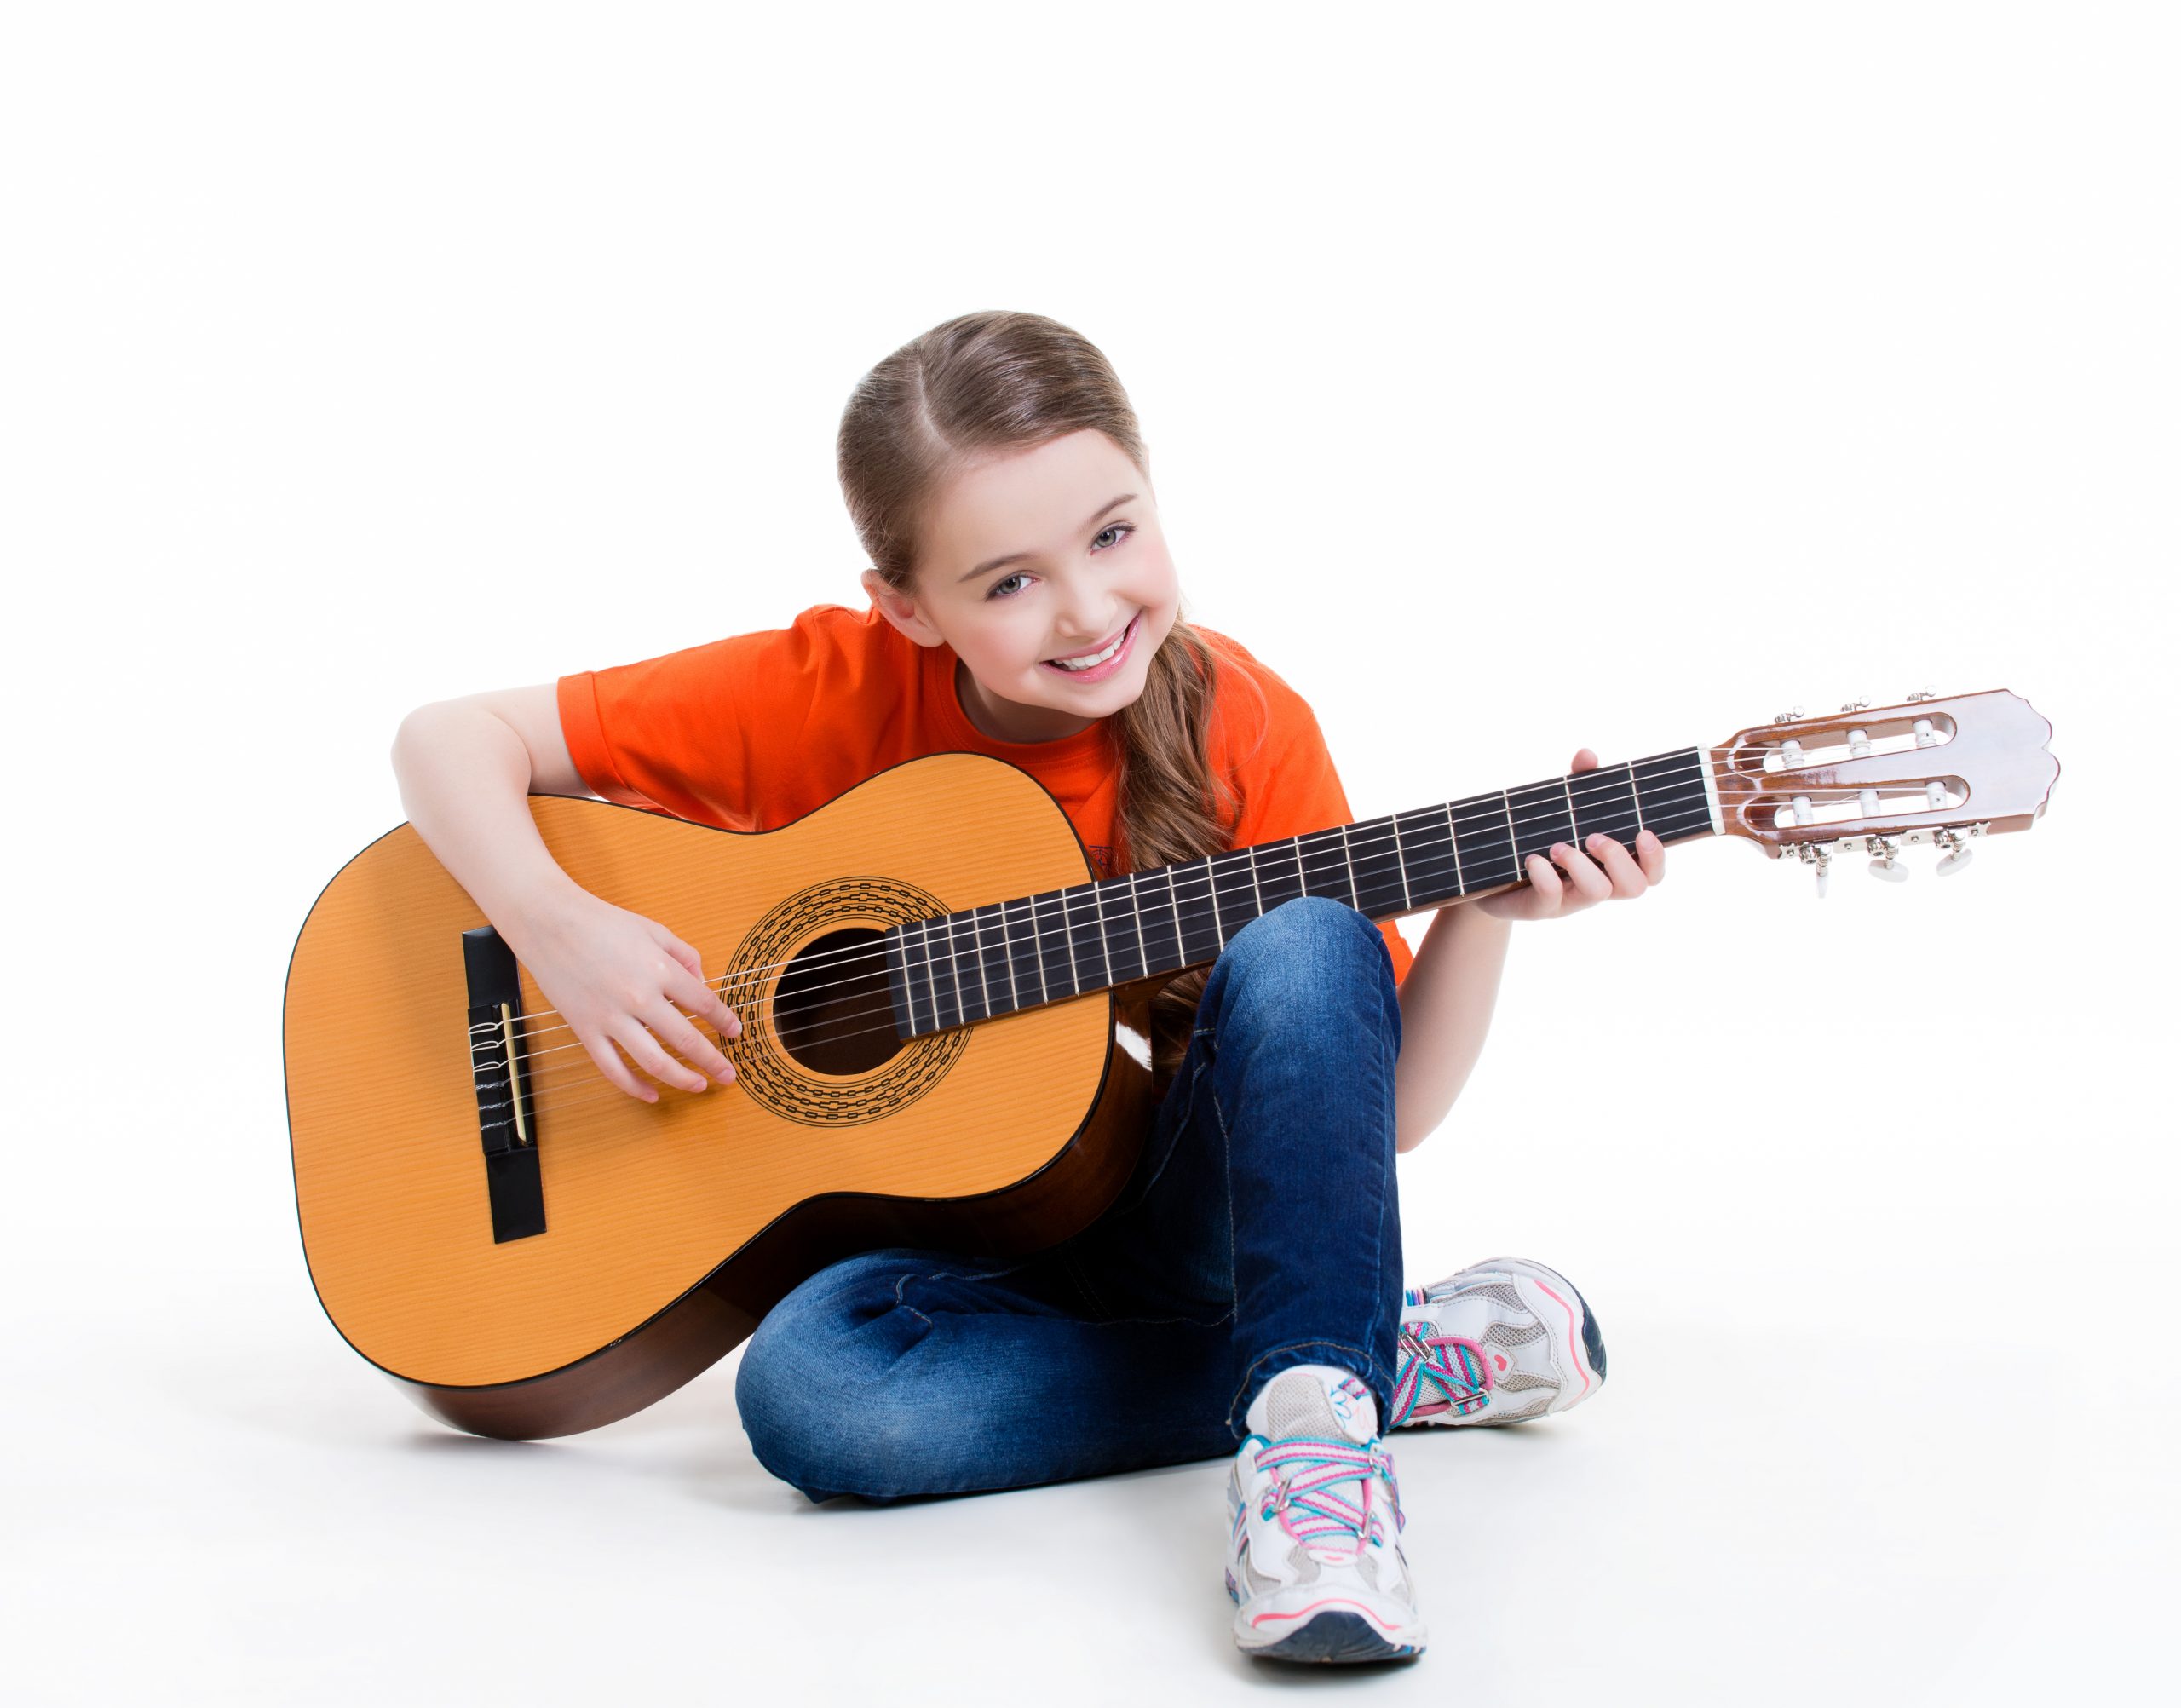 Cute girl plays on the acoustic guitar with bright emotions -  isolated on white background.